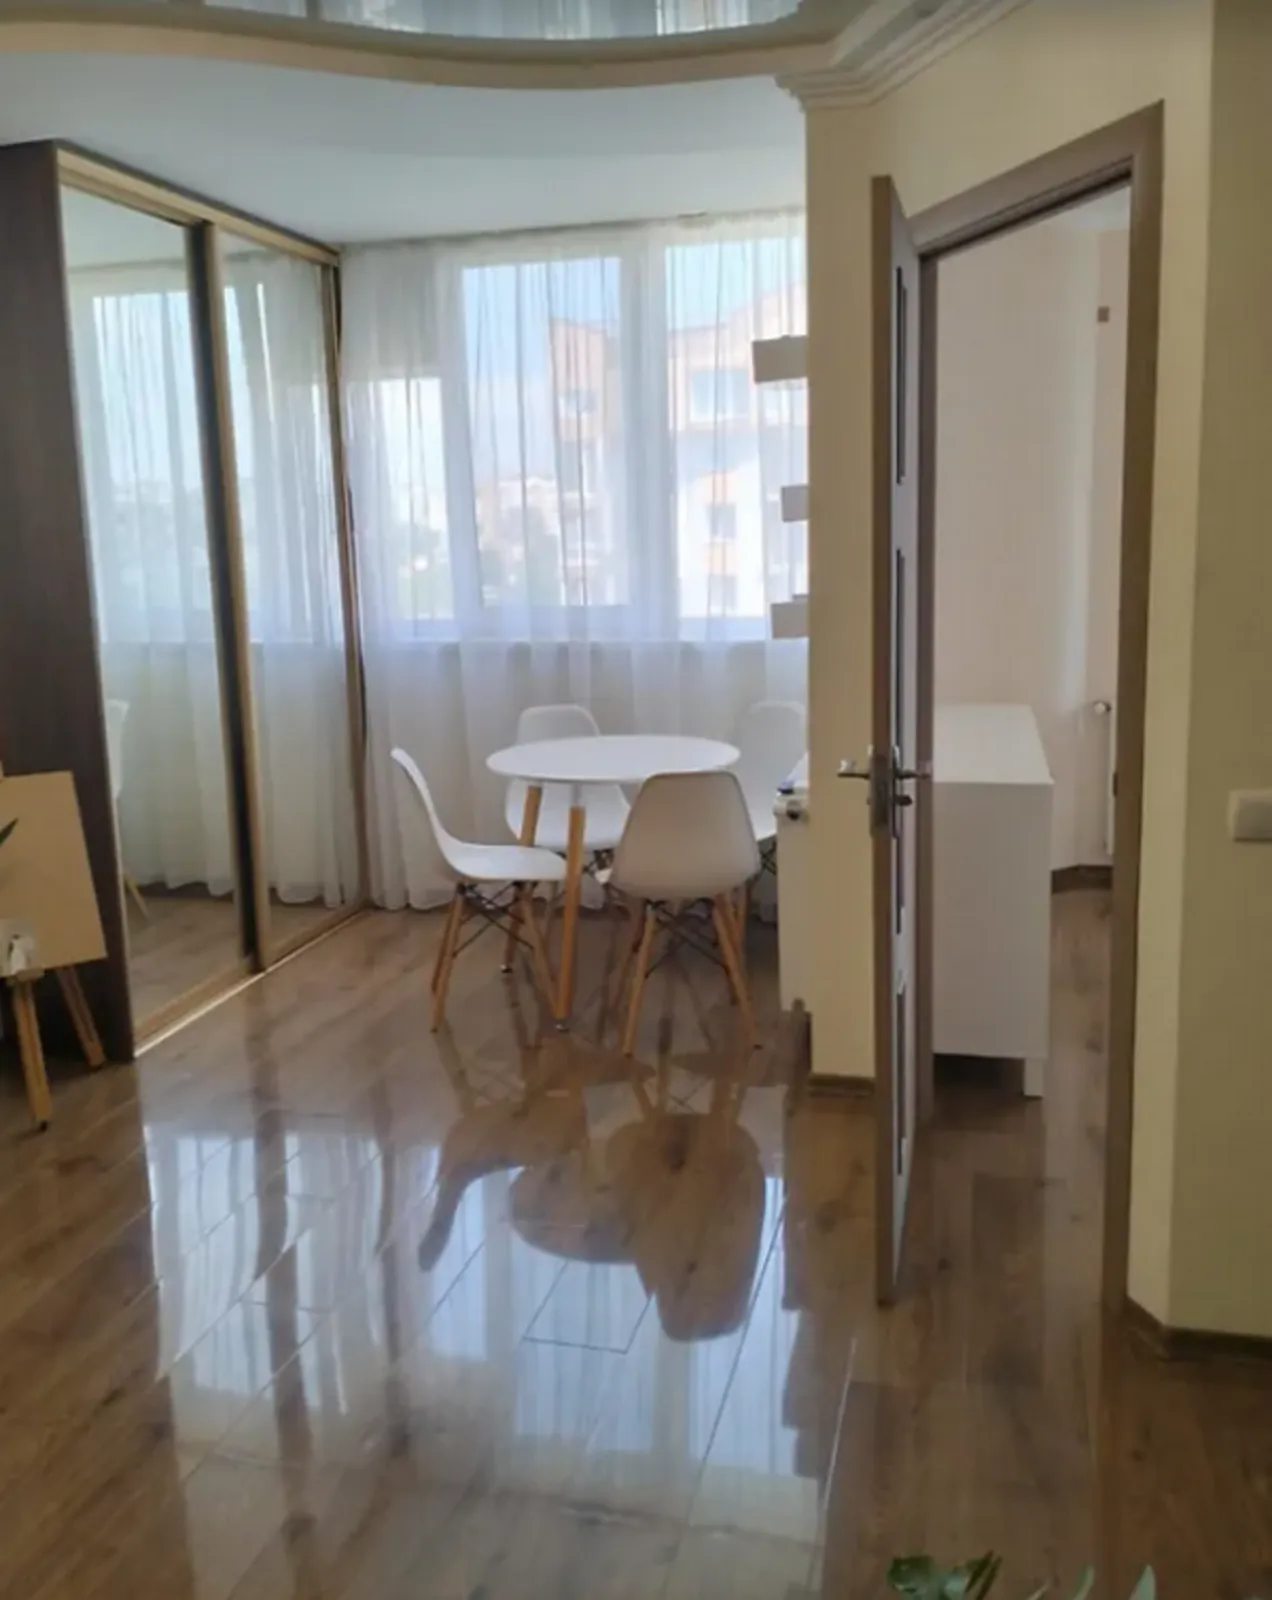 Apartments for sale. 2 rooms, 47 m², 9th floor/11 floors. Obolonya, Ternopil. 